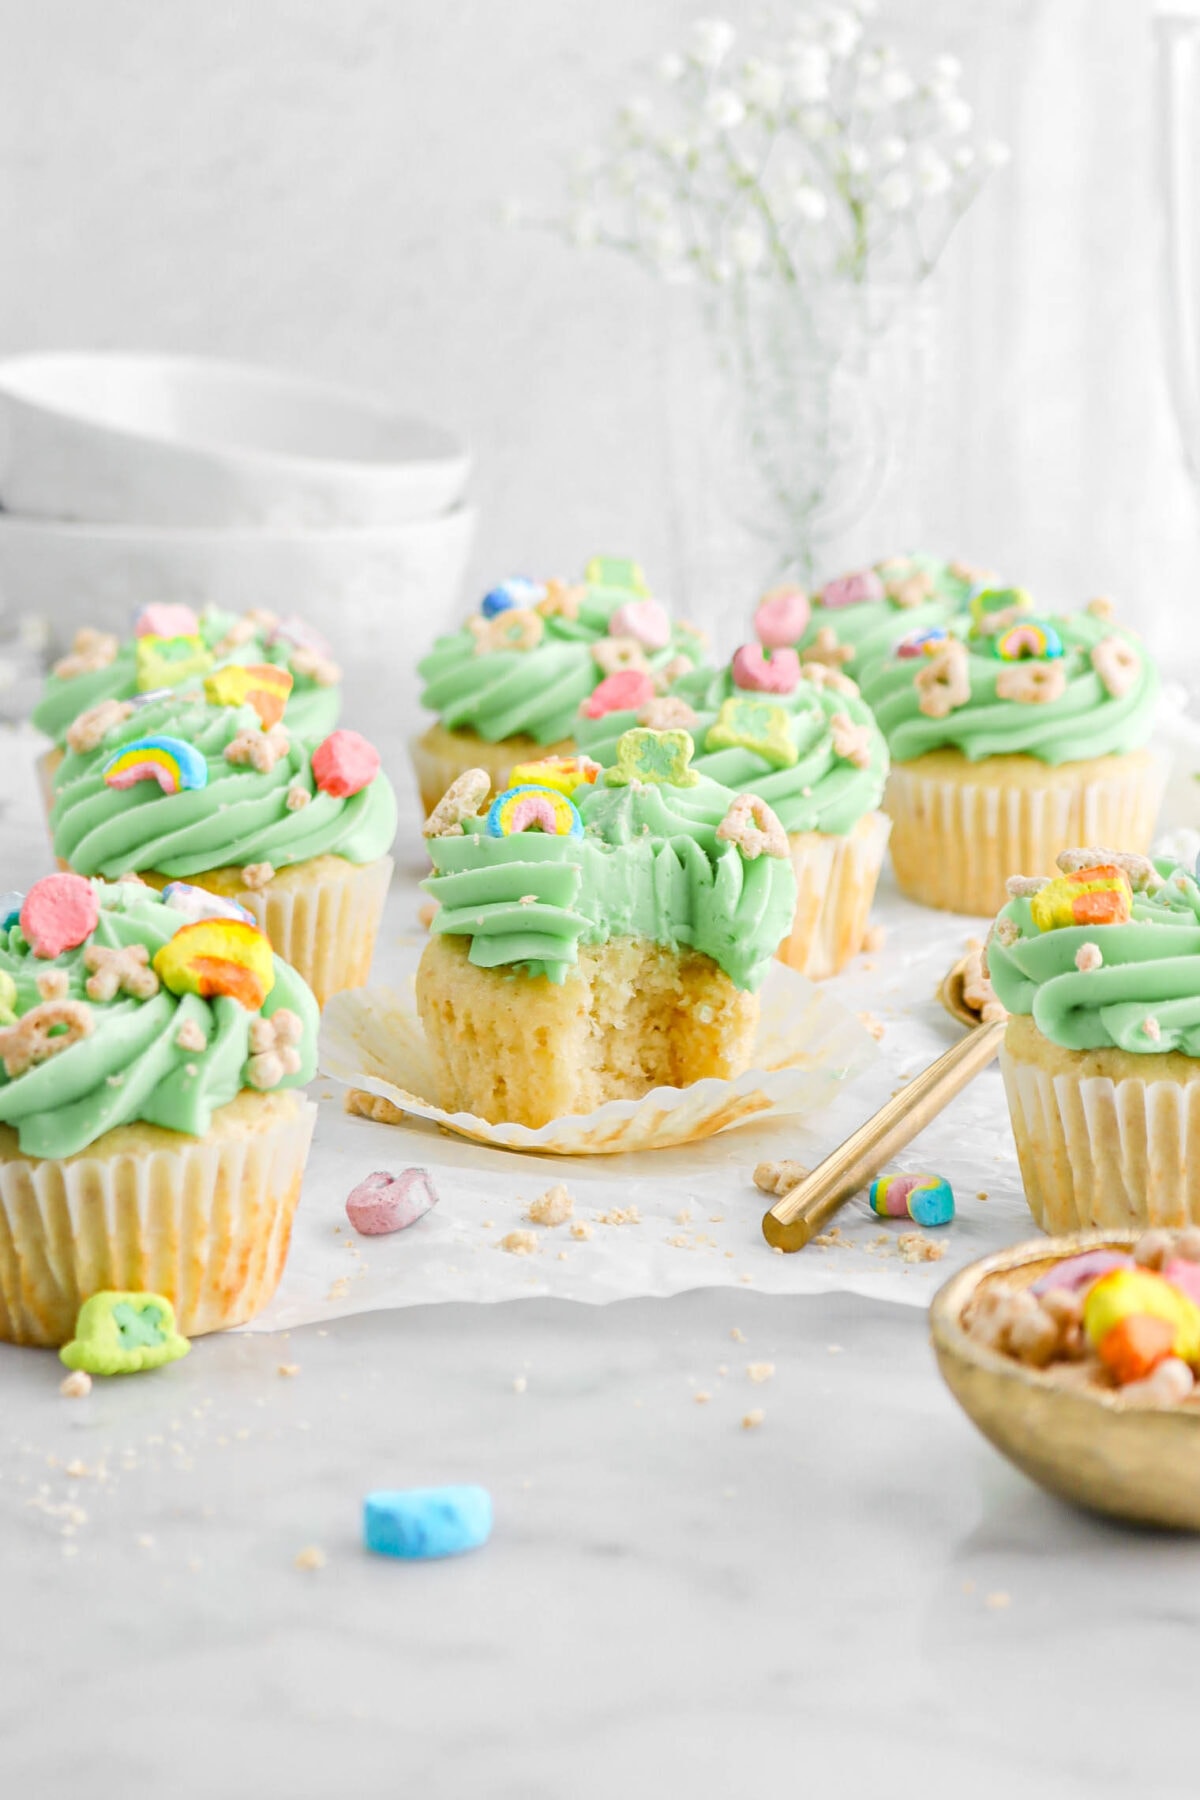 nine lucky charms cupcakes on parchment paper with bite missing from middle cupcake.